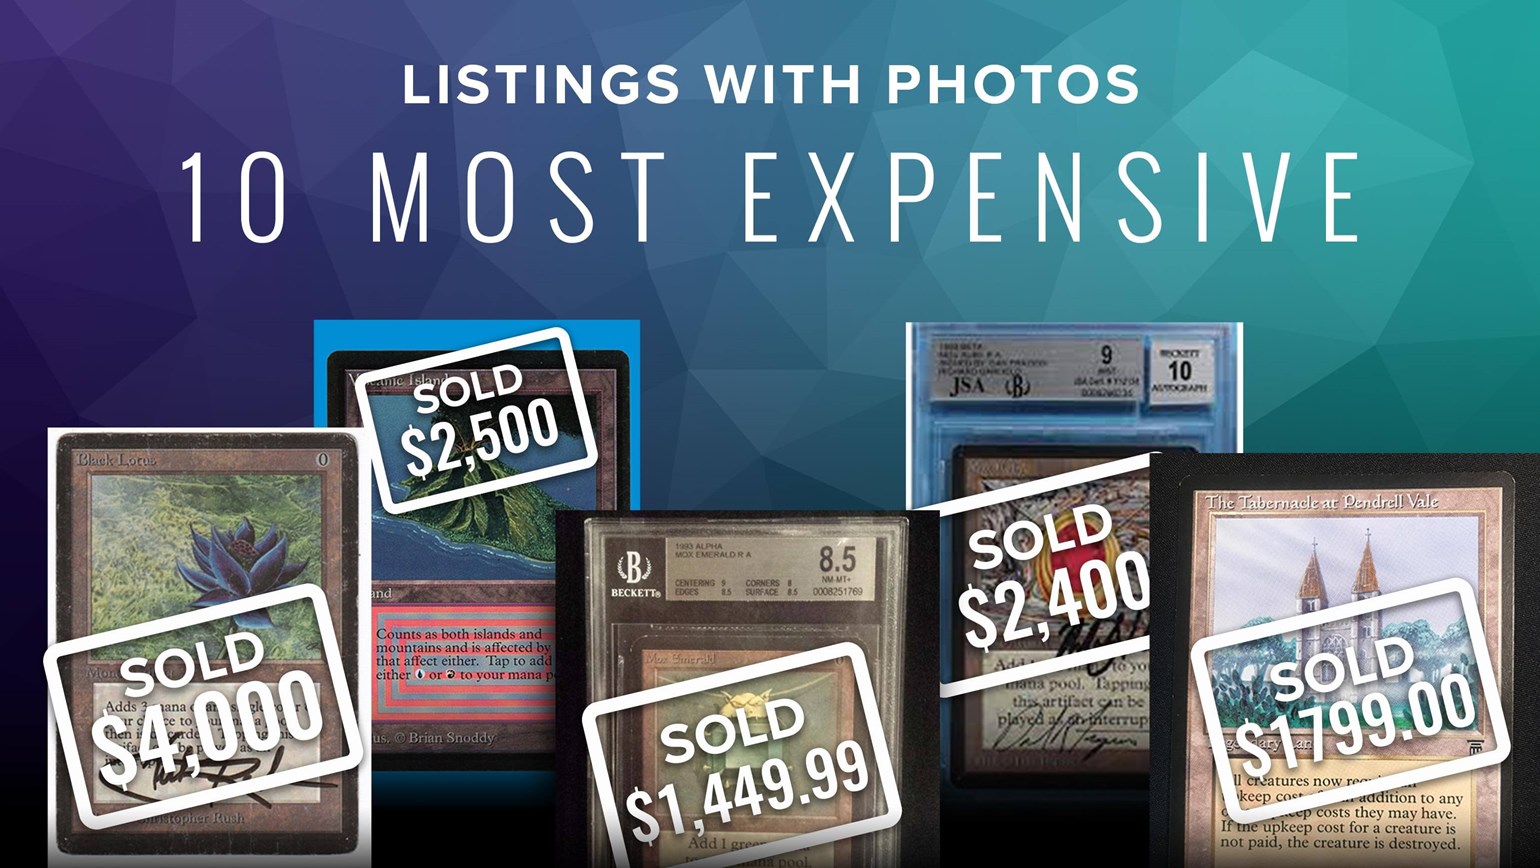 Top 10 Most Expensive Listings with Photos Sold So Far